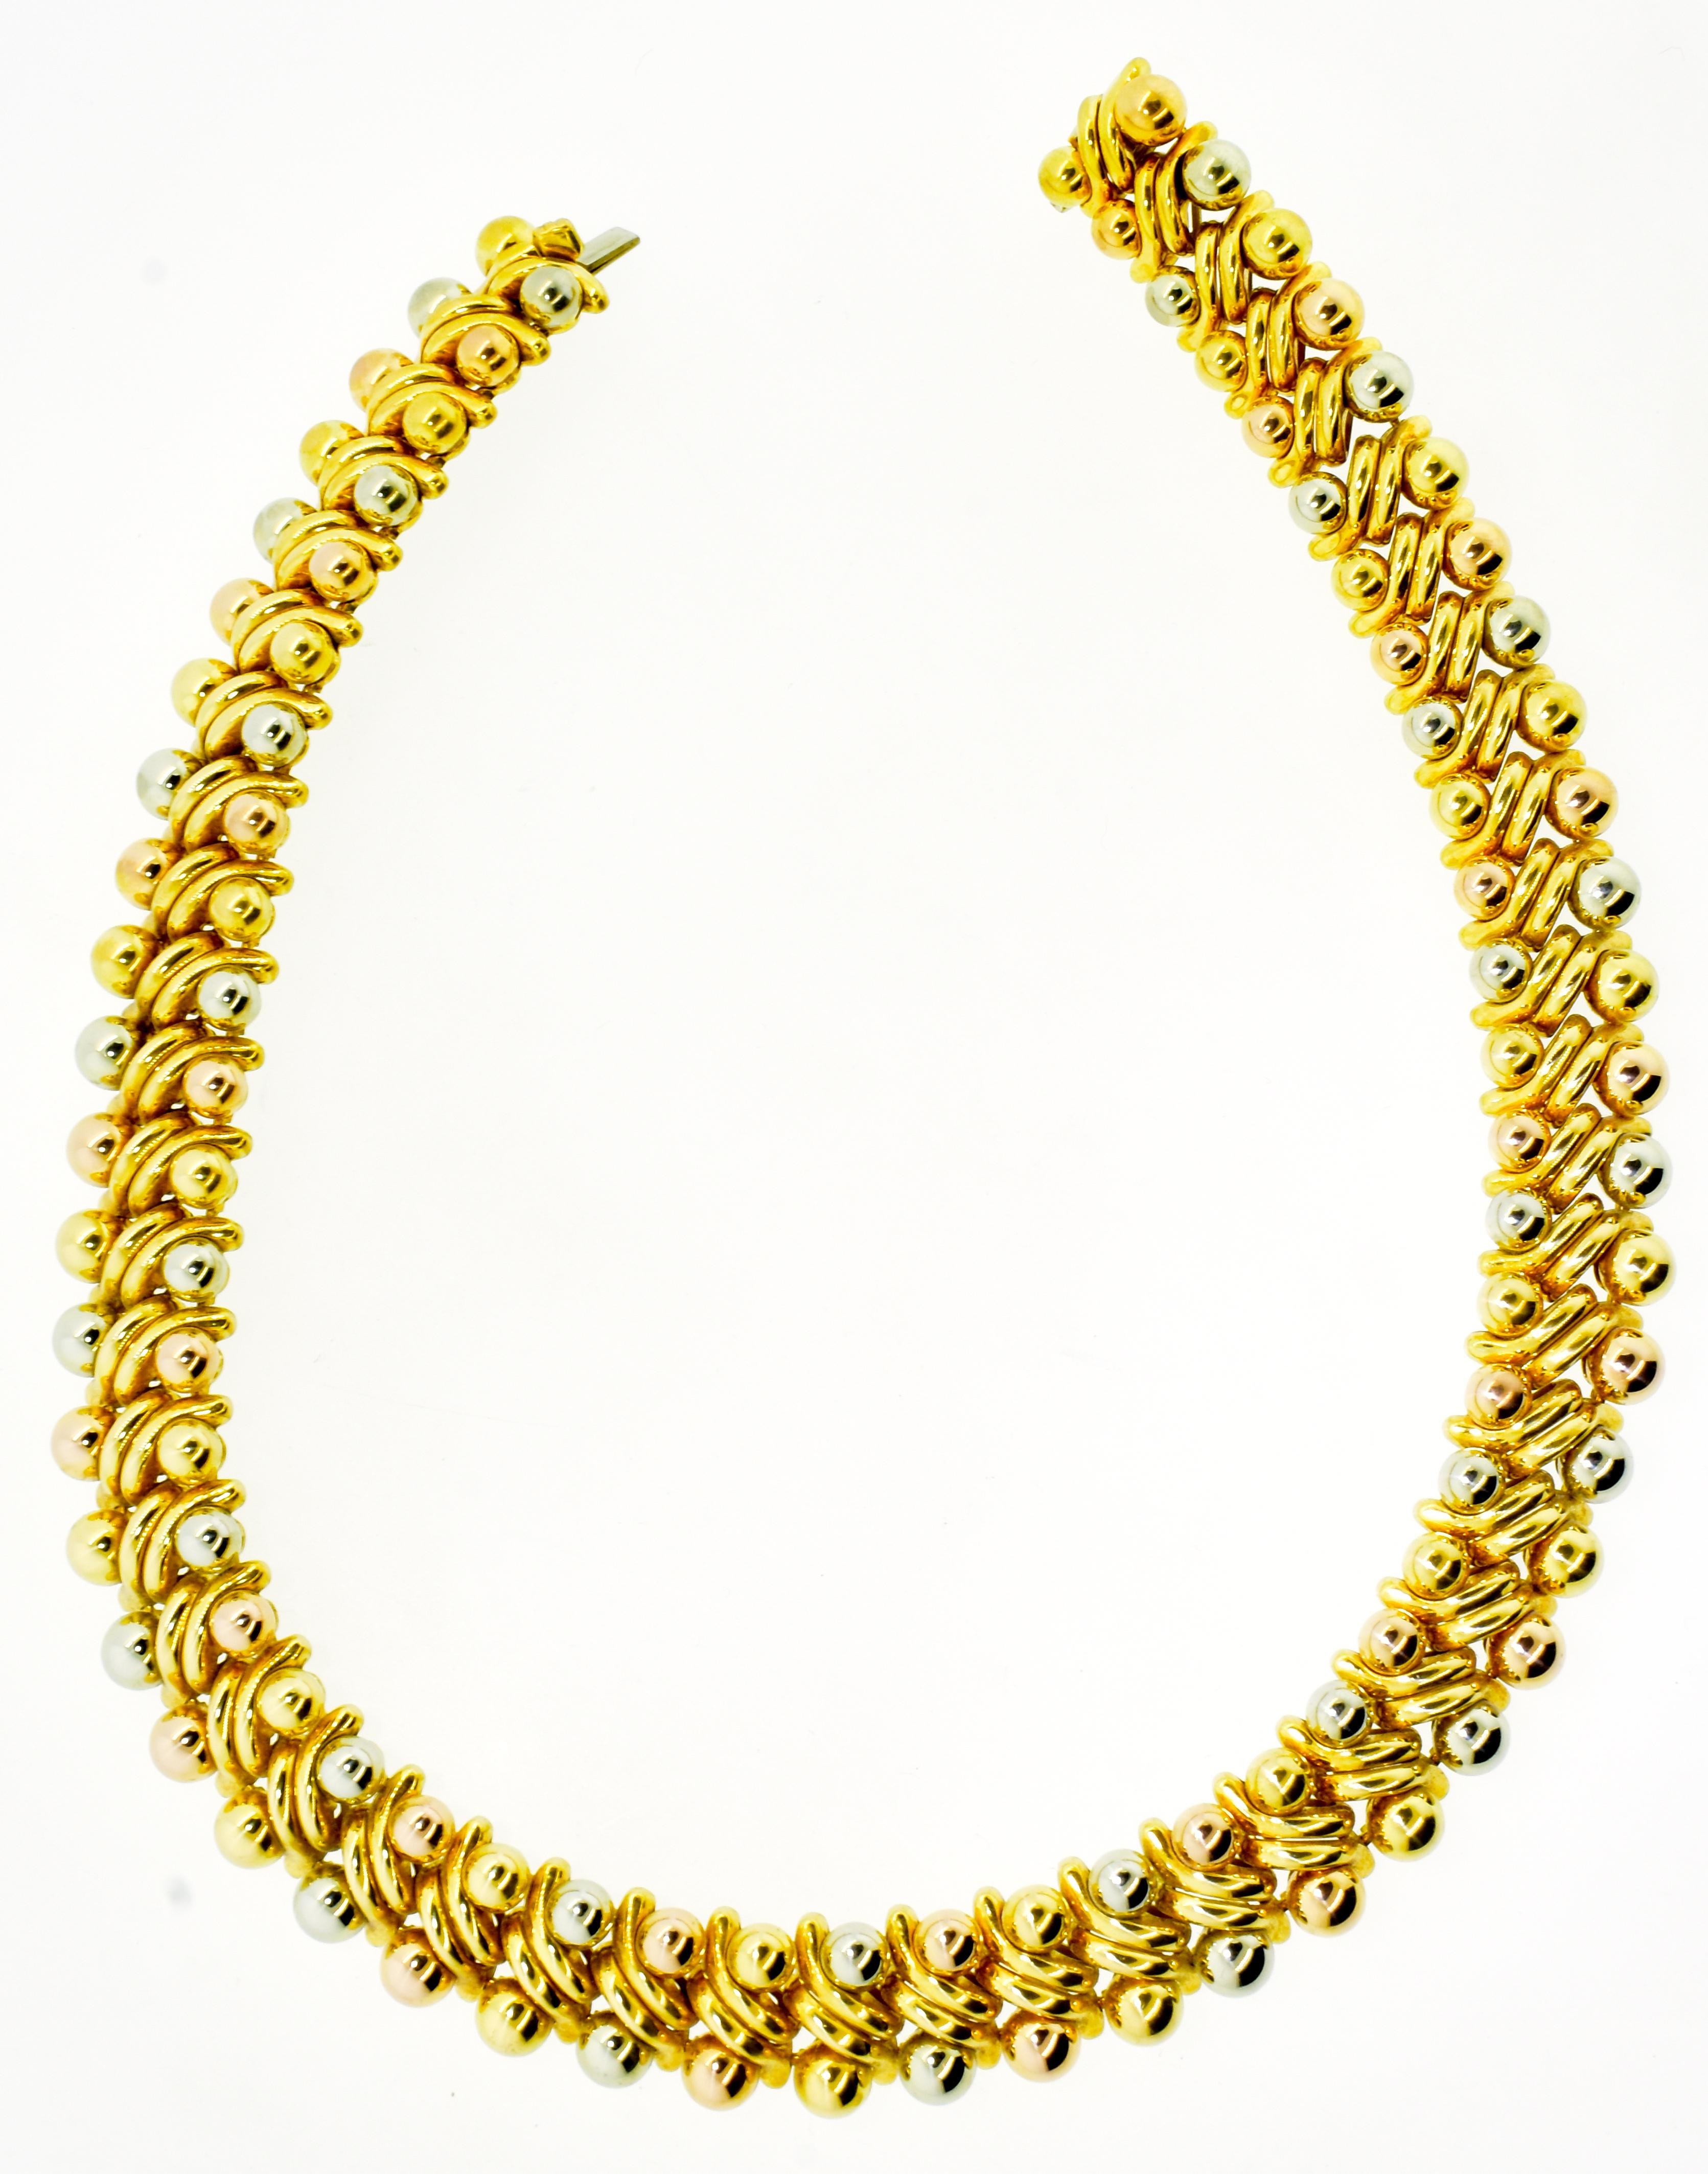 Bulgari necklace, 18K yellow, pink and white gold spheres, this classic yet bold statement is perfect for either daytime or evening.  A generous length of 17 inches and a width of .75 inches, this particular vintage choker style necklace by Bvlgari